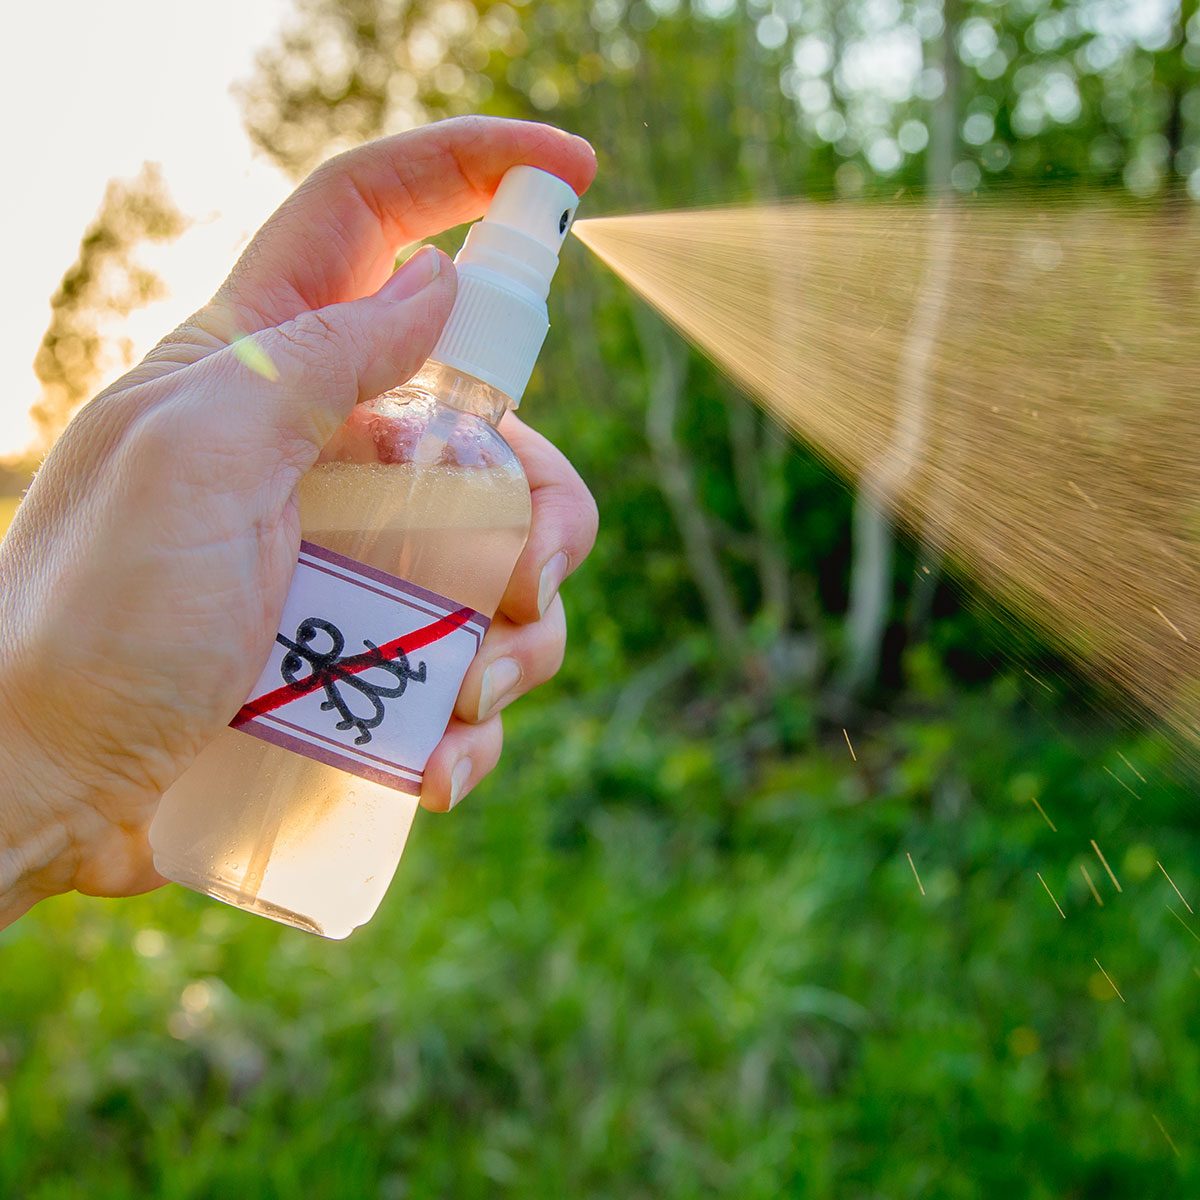 Experimenting with different ingredients to create a customized, homemade mosquito repellent can be a fun way to avoid mosquito bites.